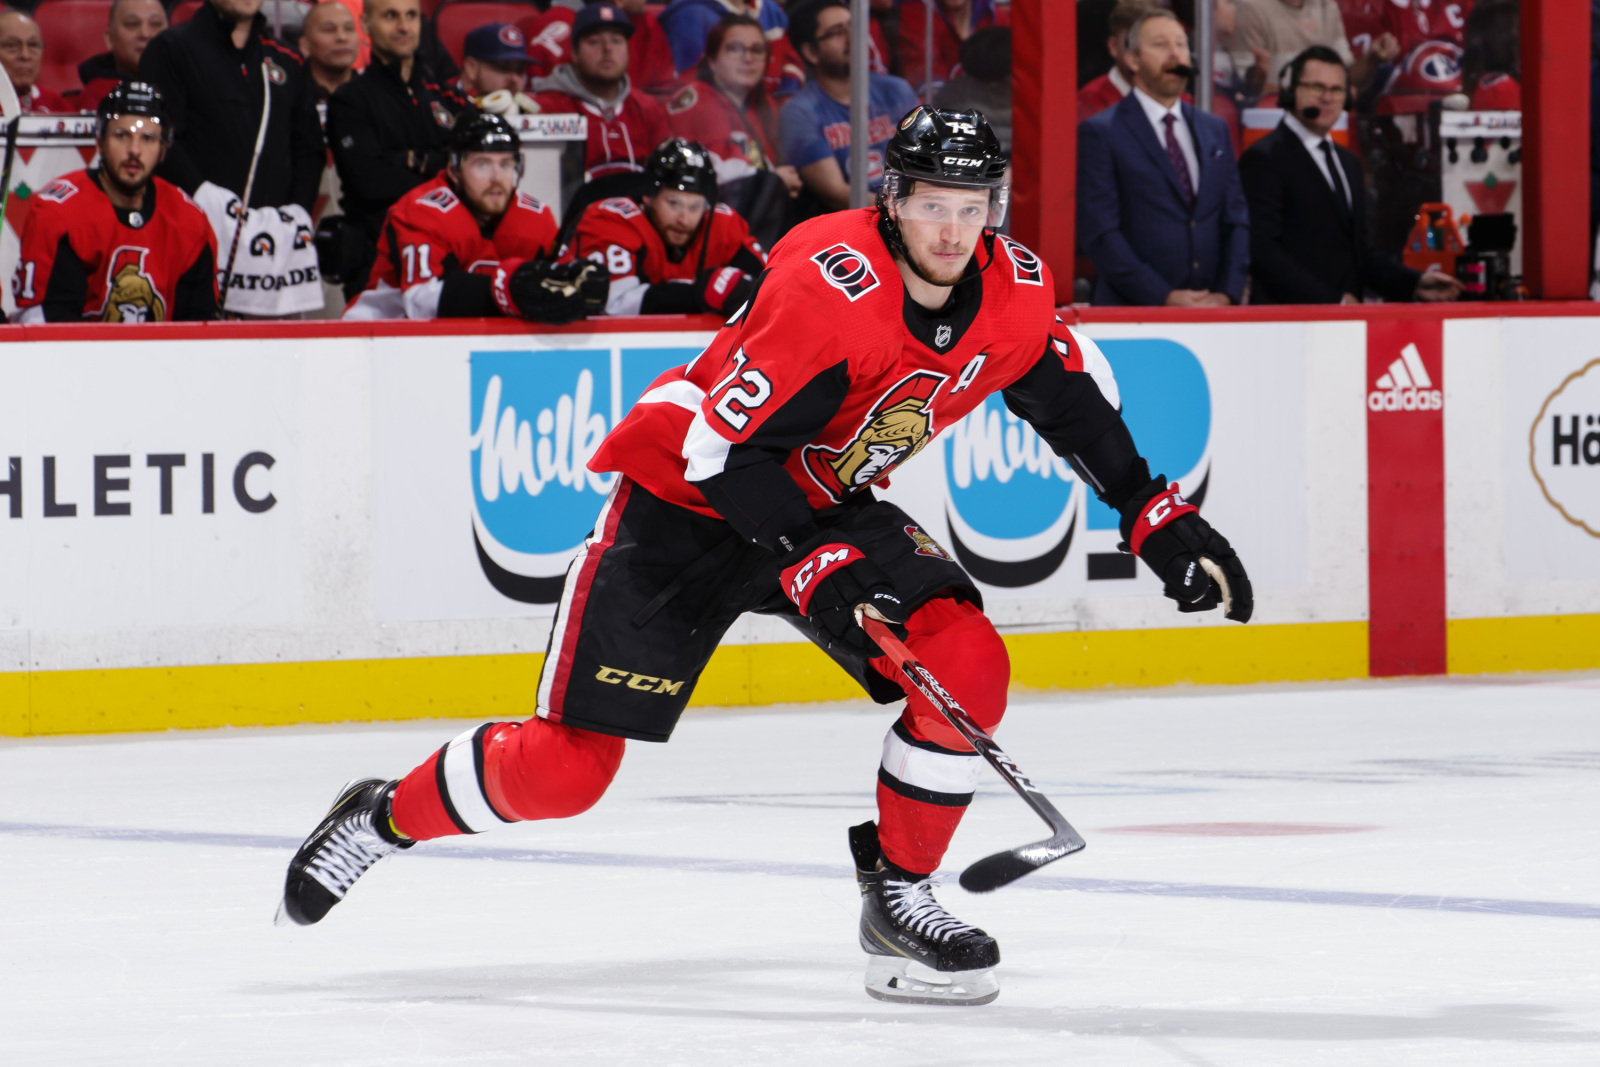 Has Thomas Chabot Played his way Onto Canada's Olympic Team? - The